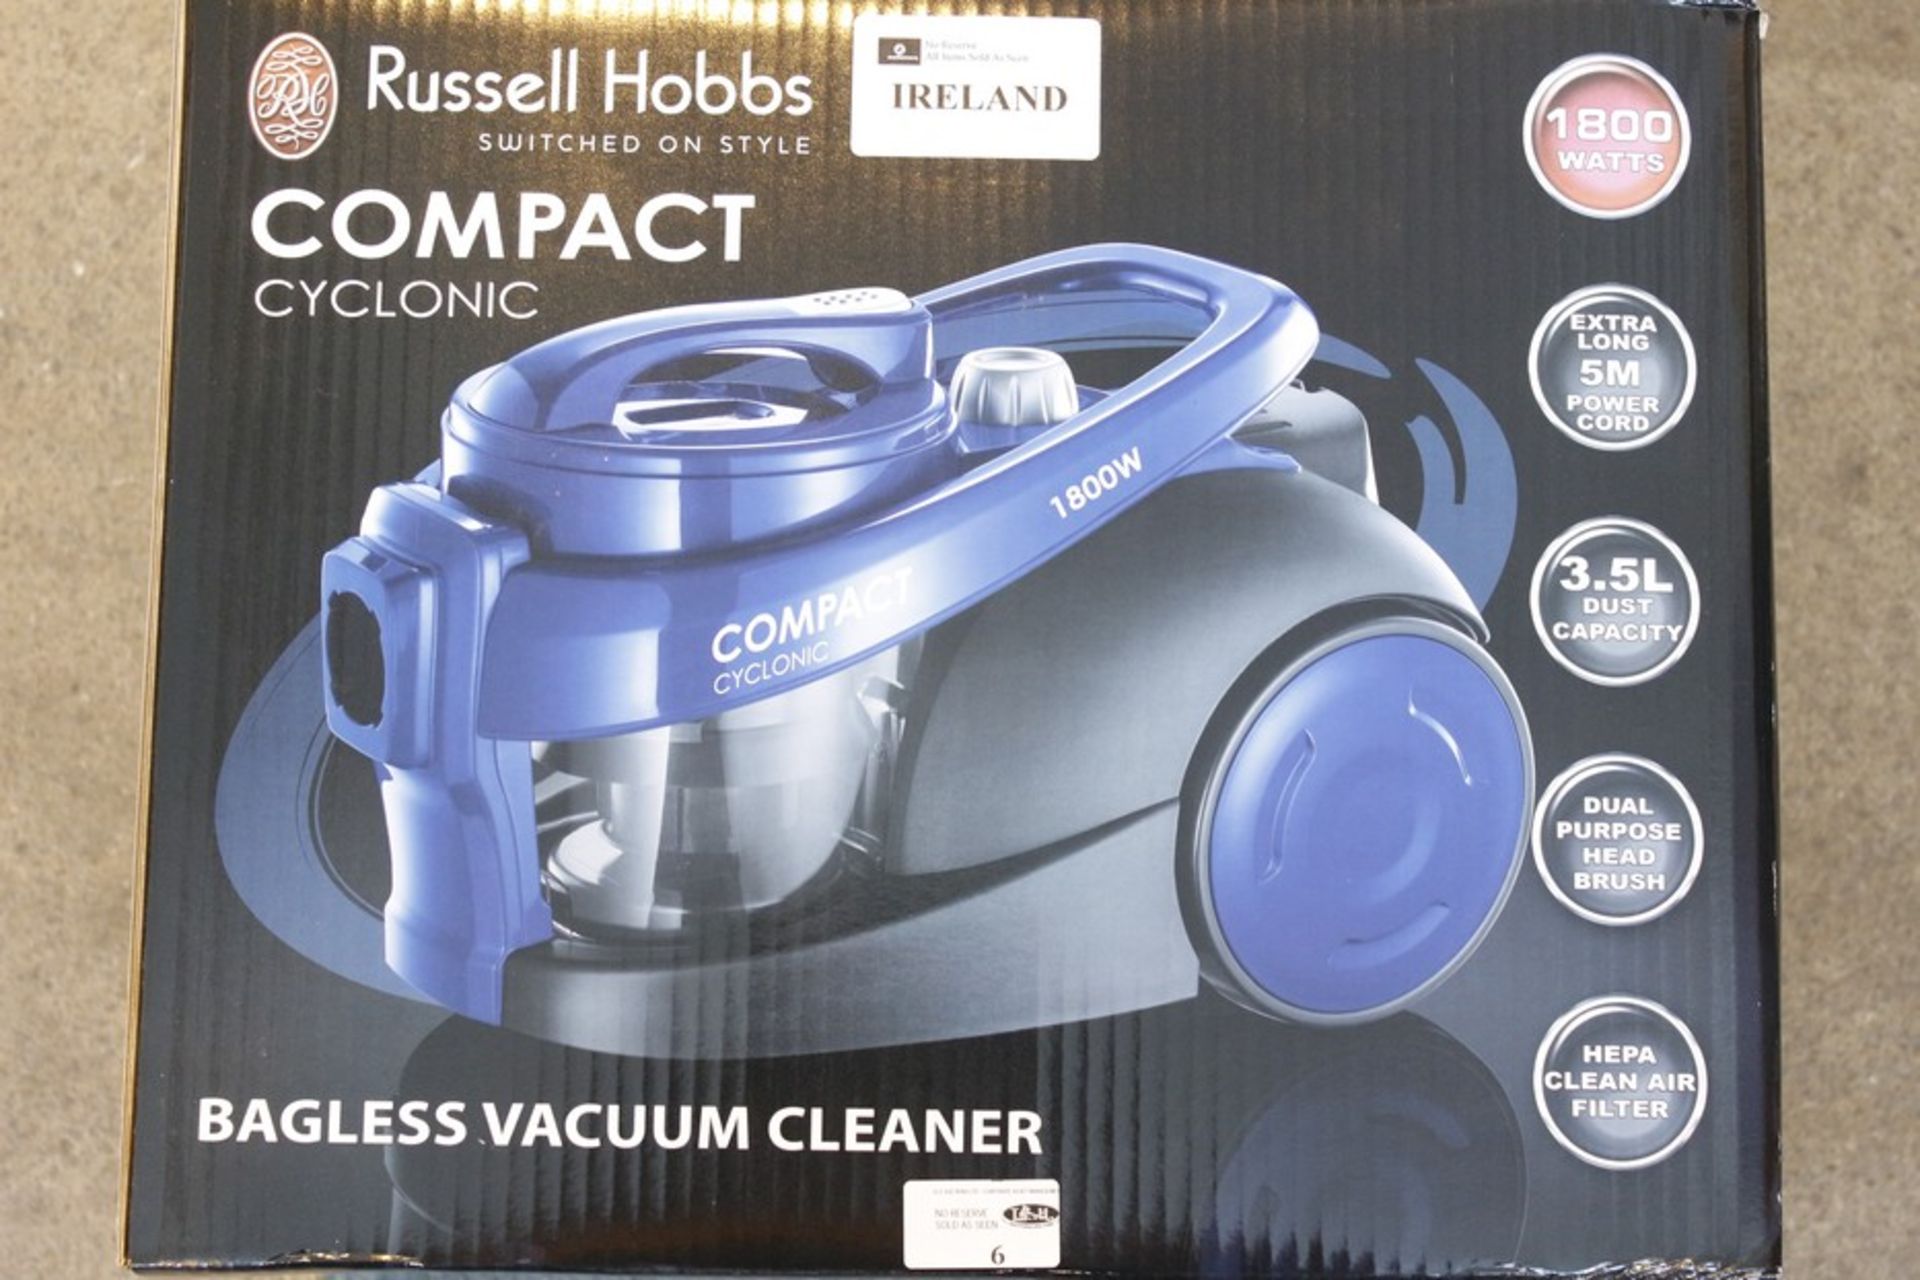 1 x BOXED RUSSEL HOBBS COMPACT CYCLONE VACUUM CLEANER   *PLEASE NOTE THAT THE BID PRICE IS